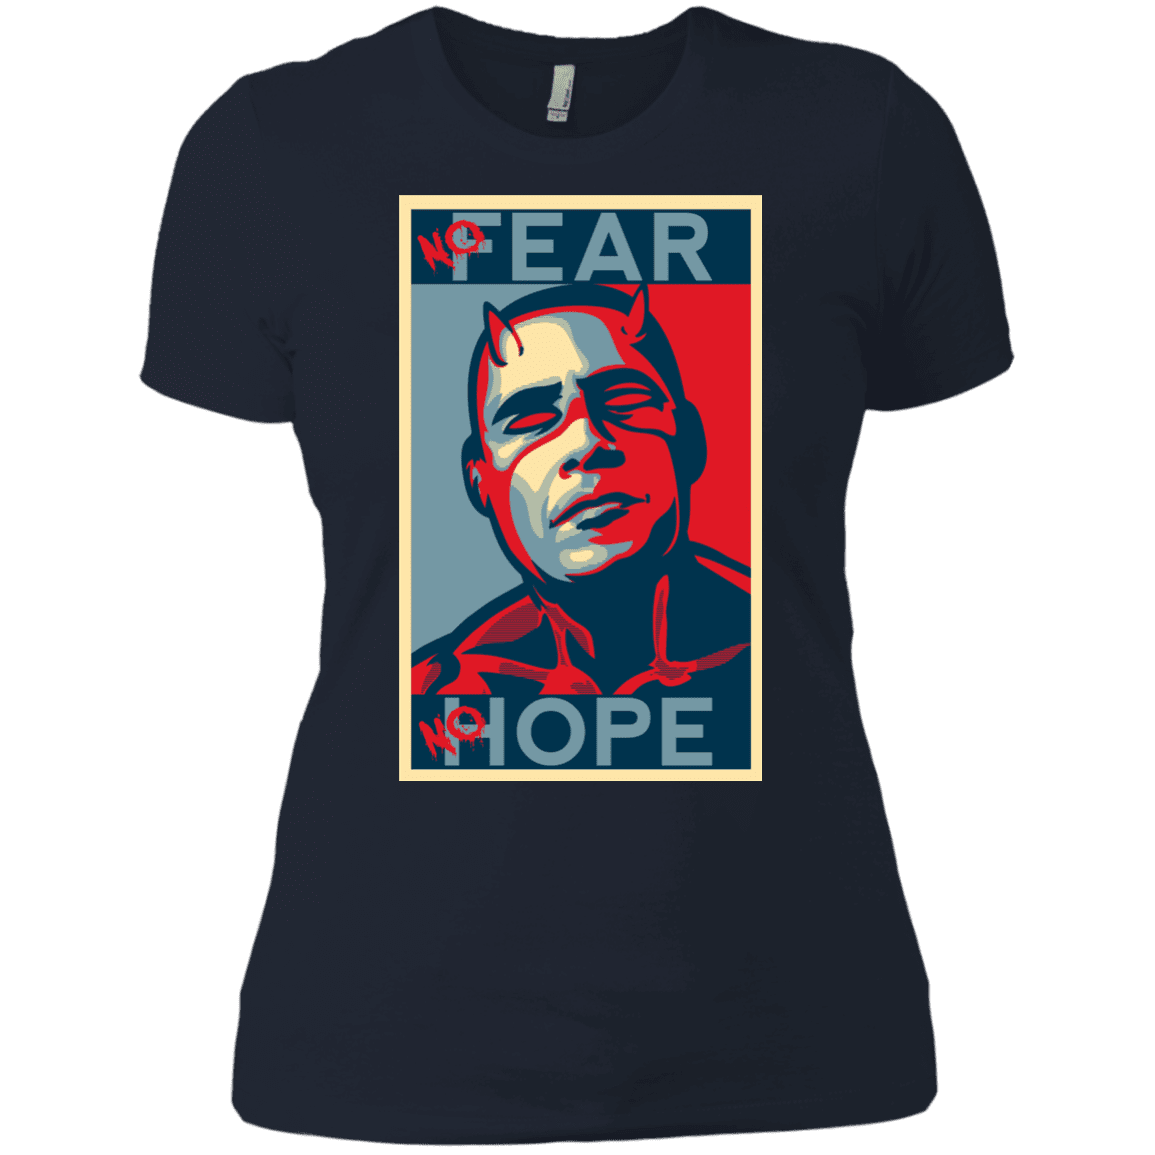 T-Shirts Midnight Navy / X-Small A man with no fear Women's Premium T-Shirt